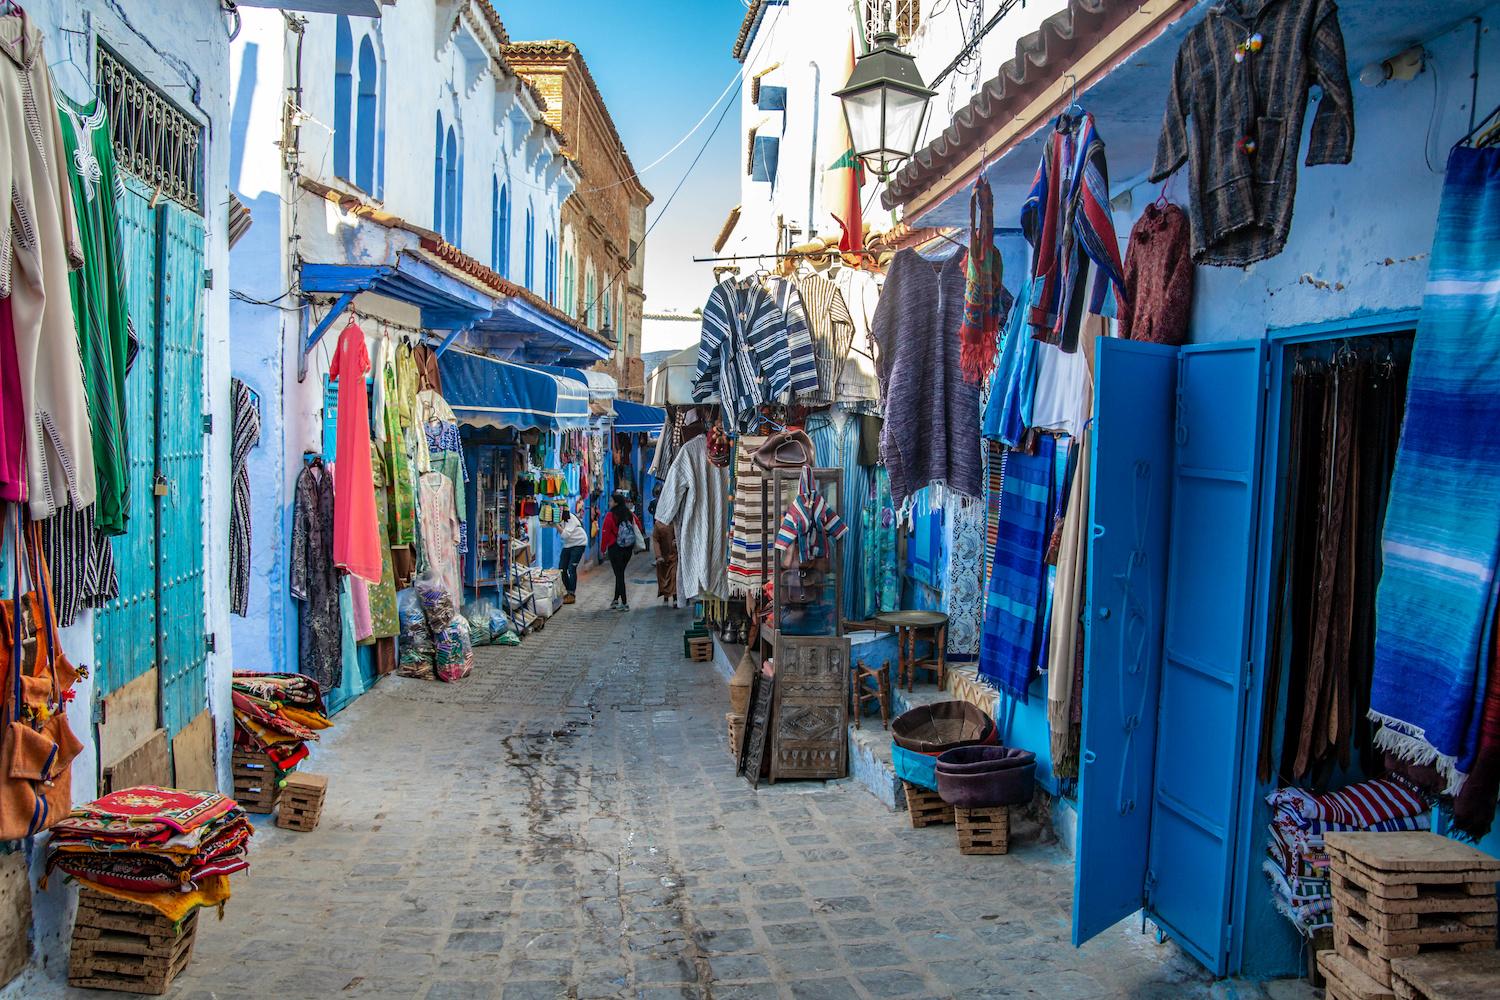 Street views in Chefchaouen, Marocco